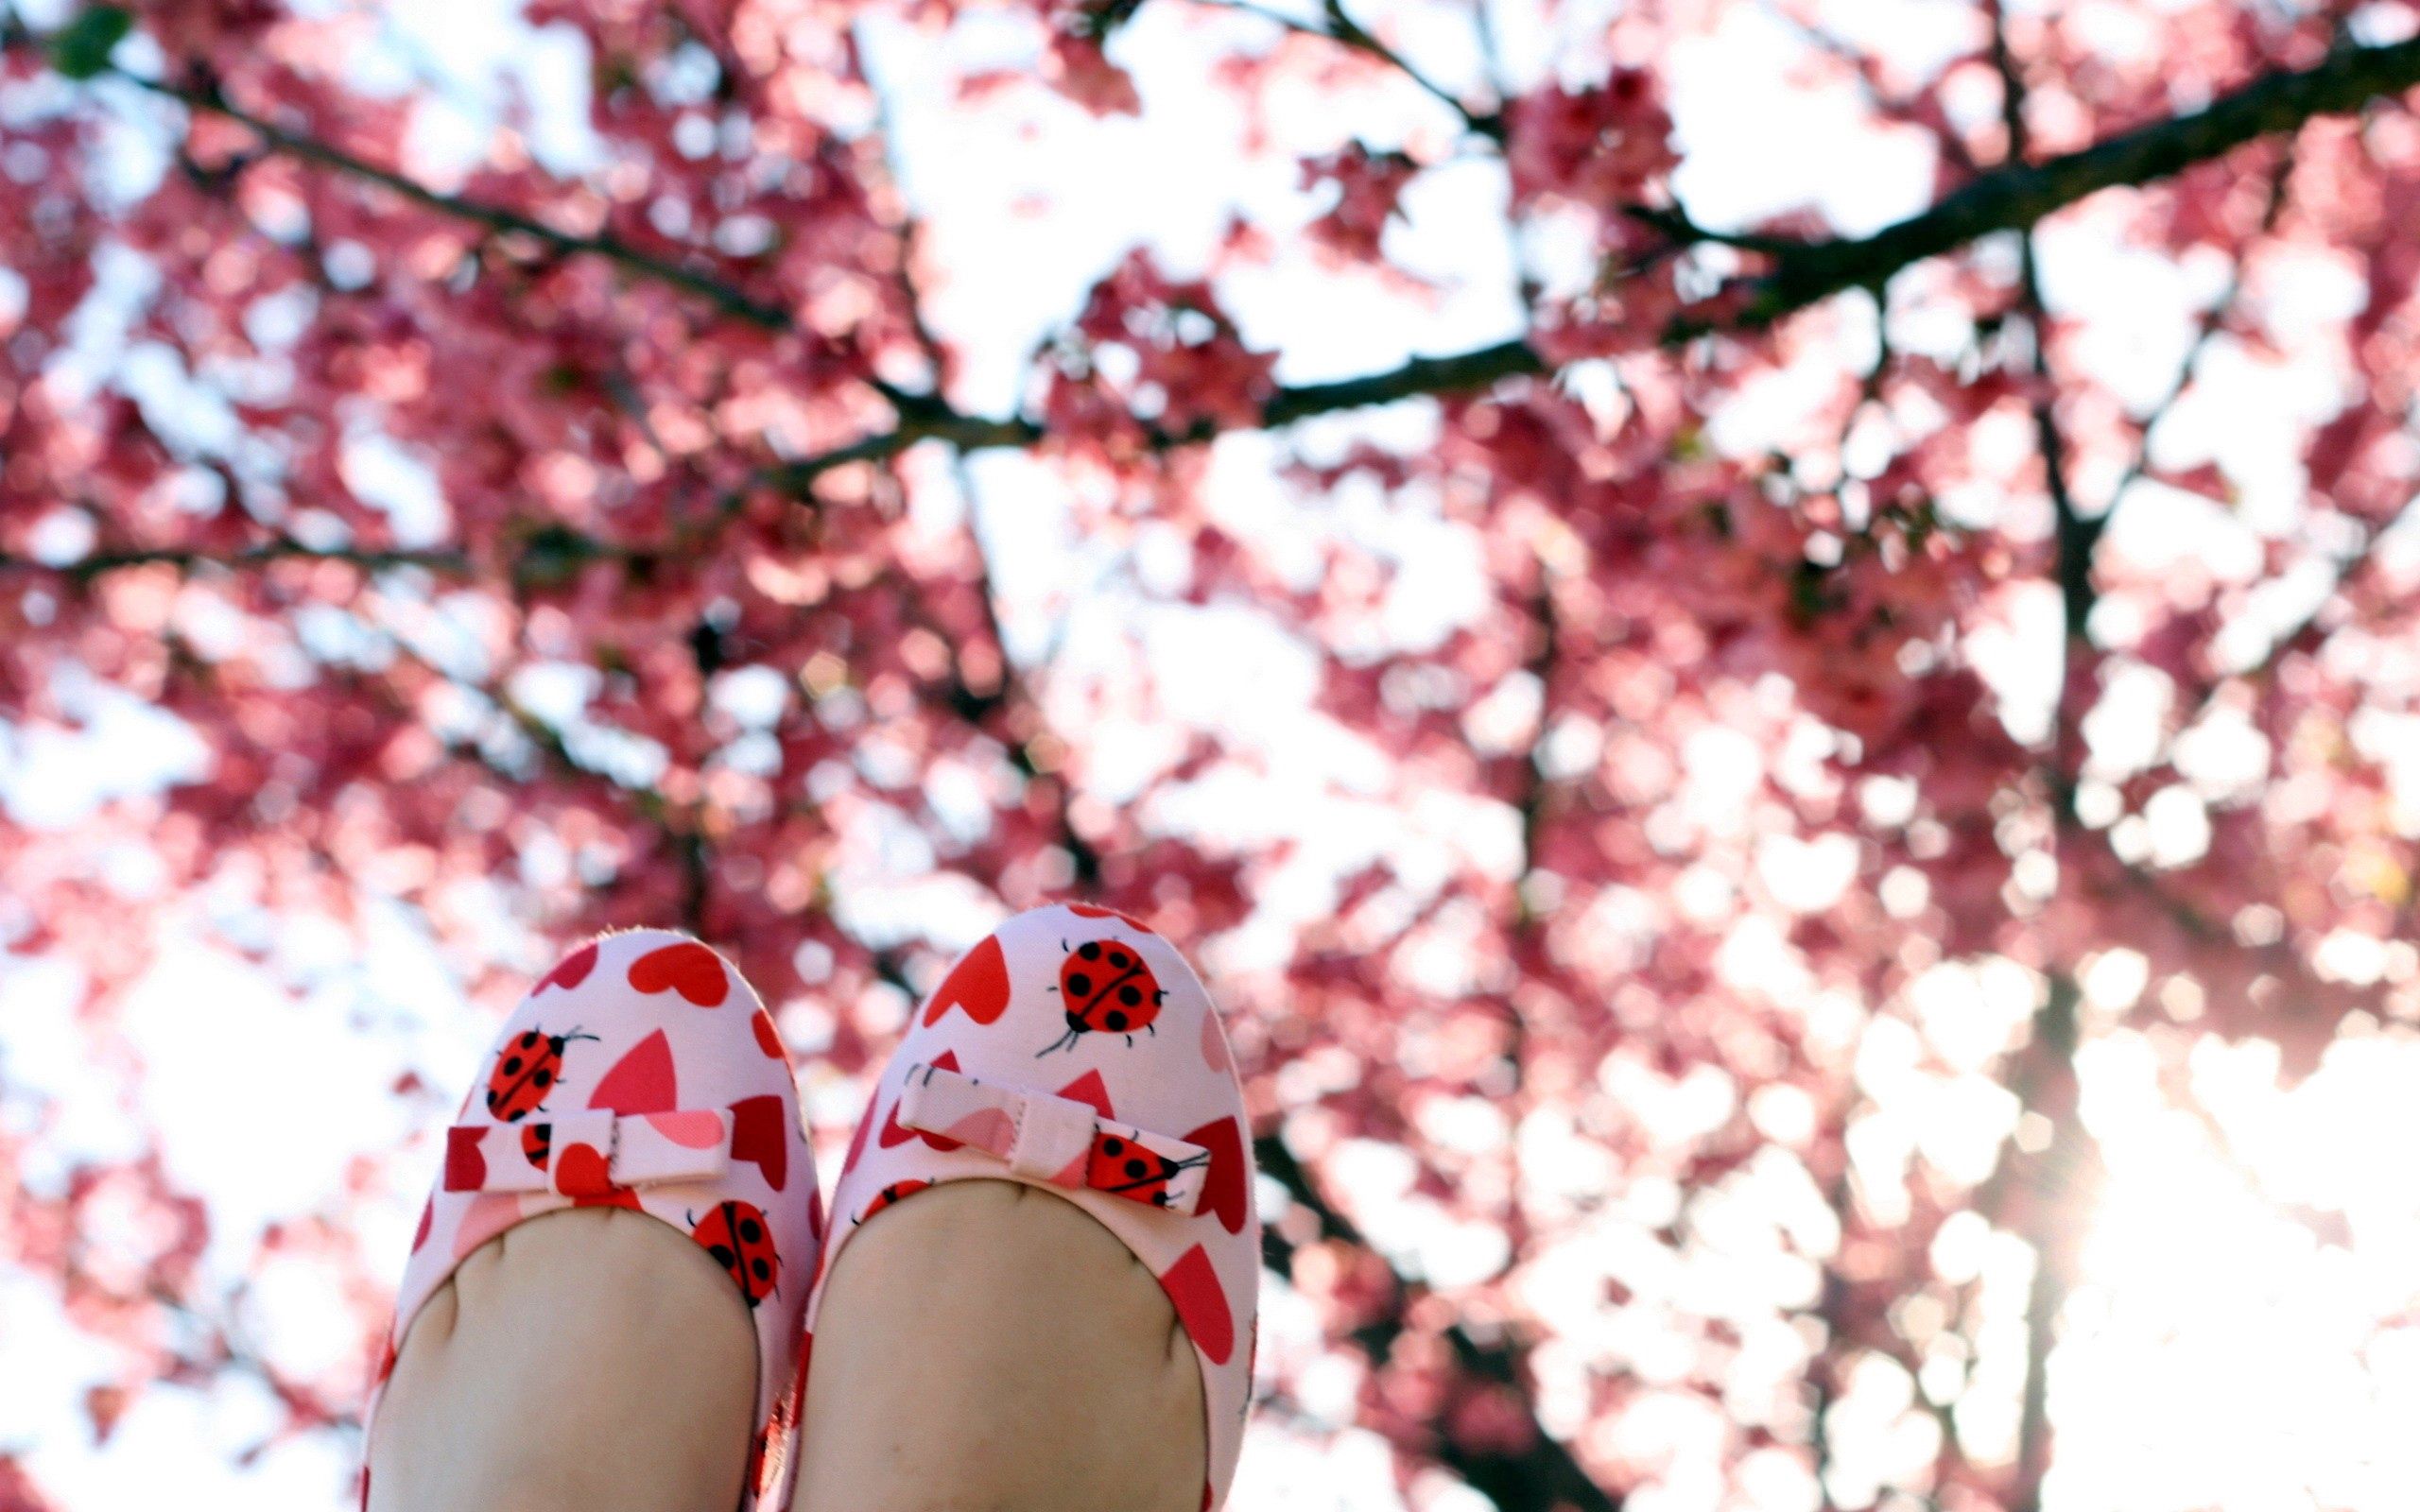 Download PC Wallpaper miscellanea, miscellaneous, wood, legs, tree, branches, positive, slippers